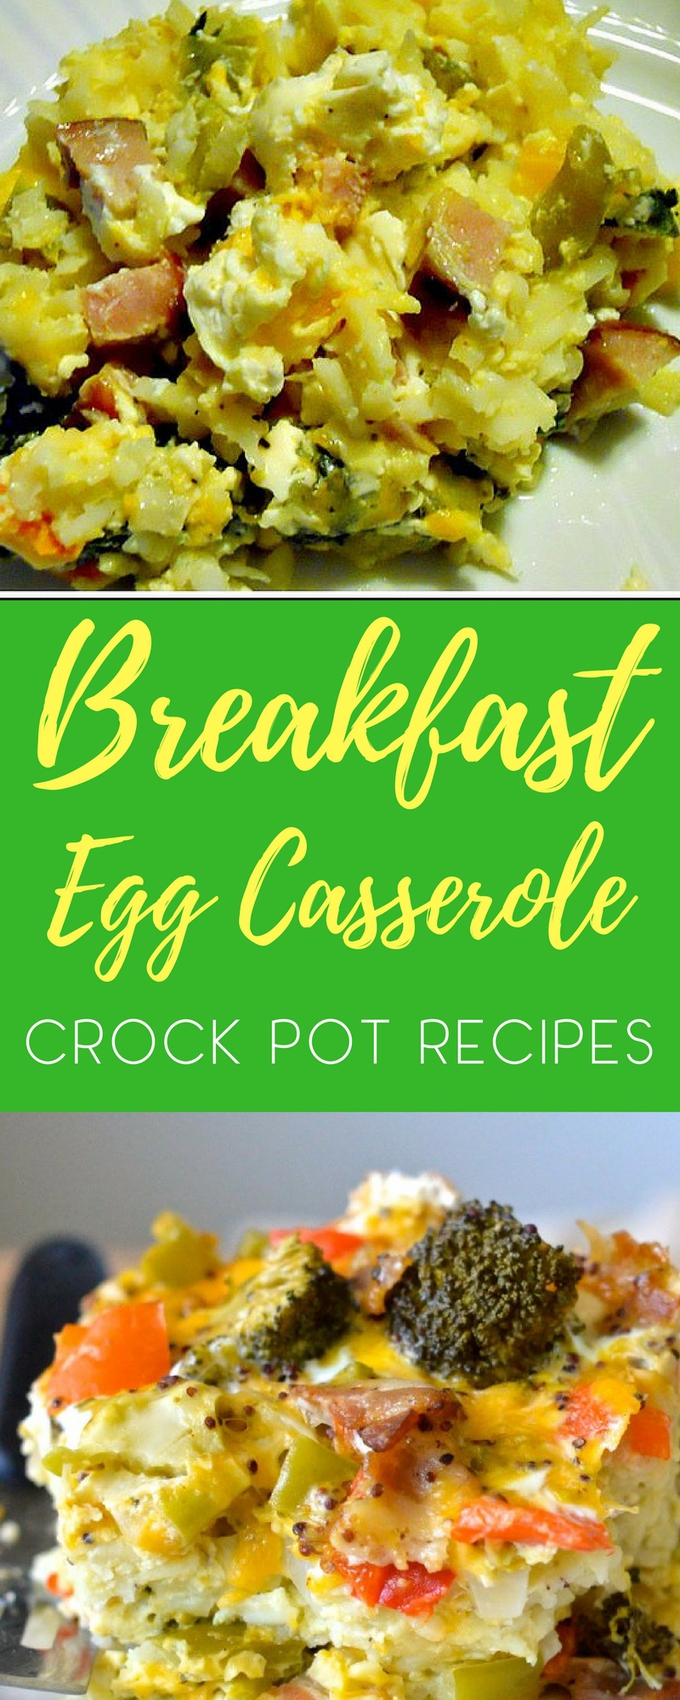 Using the best crock pot egg casserole recipes you can start your day off with a delicious meal without putting in too much time in the morning. Crock Pot Recipes | Best Crock Pot Recipe | Breakfast Recipes | Best Breakfast Recipes | Crock Pot Breakfast Recipes #Breakfast #BreakfastRecipes #EggRecipes #Crockpot #CrockpotRecipes #BreakfastCasserole